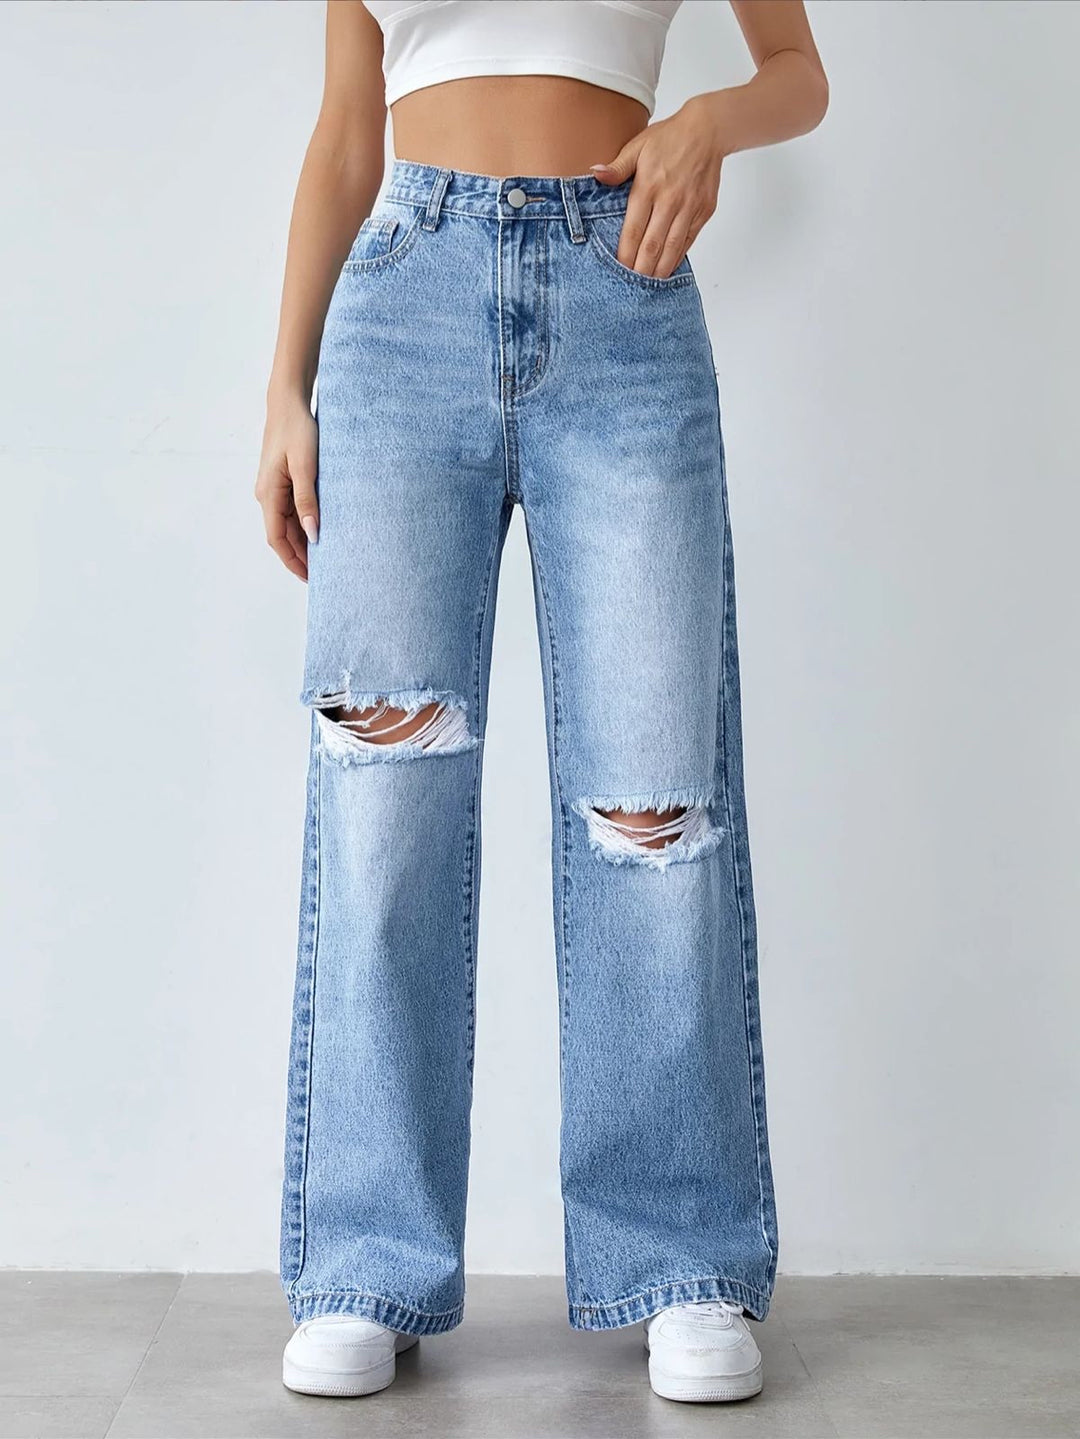 Stylish ripped jeans for women